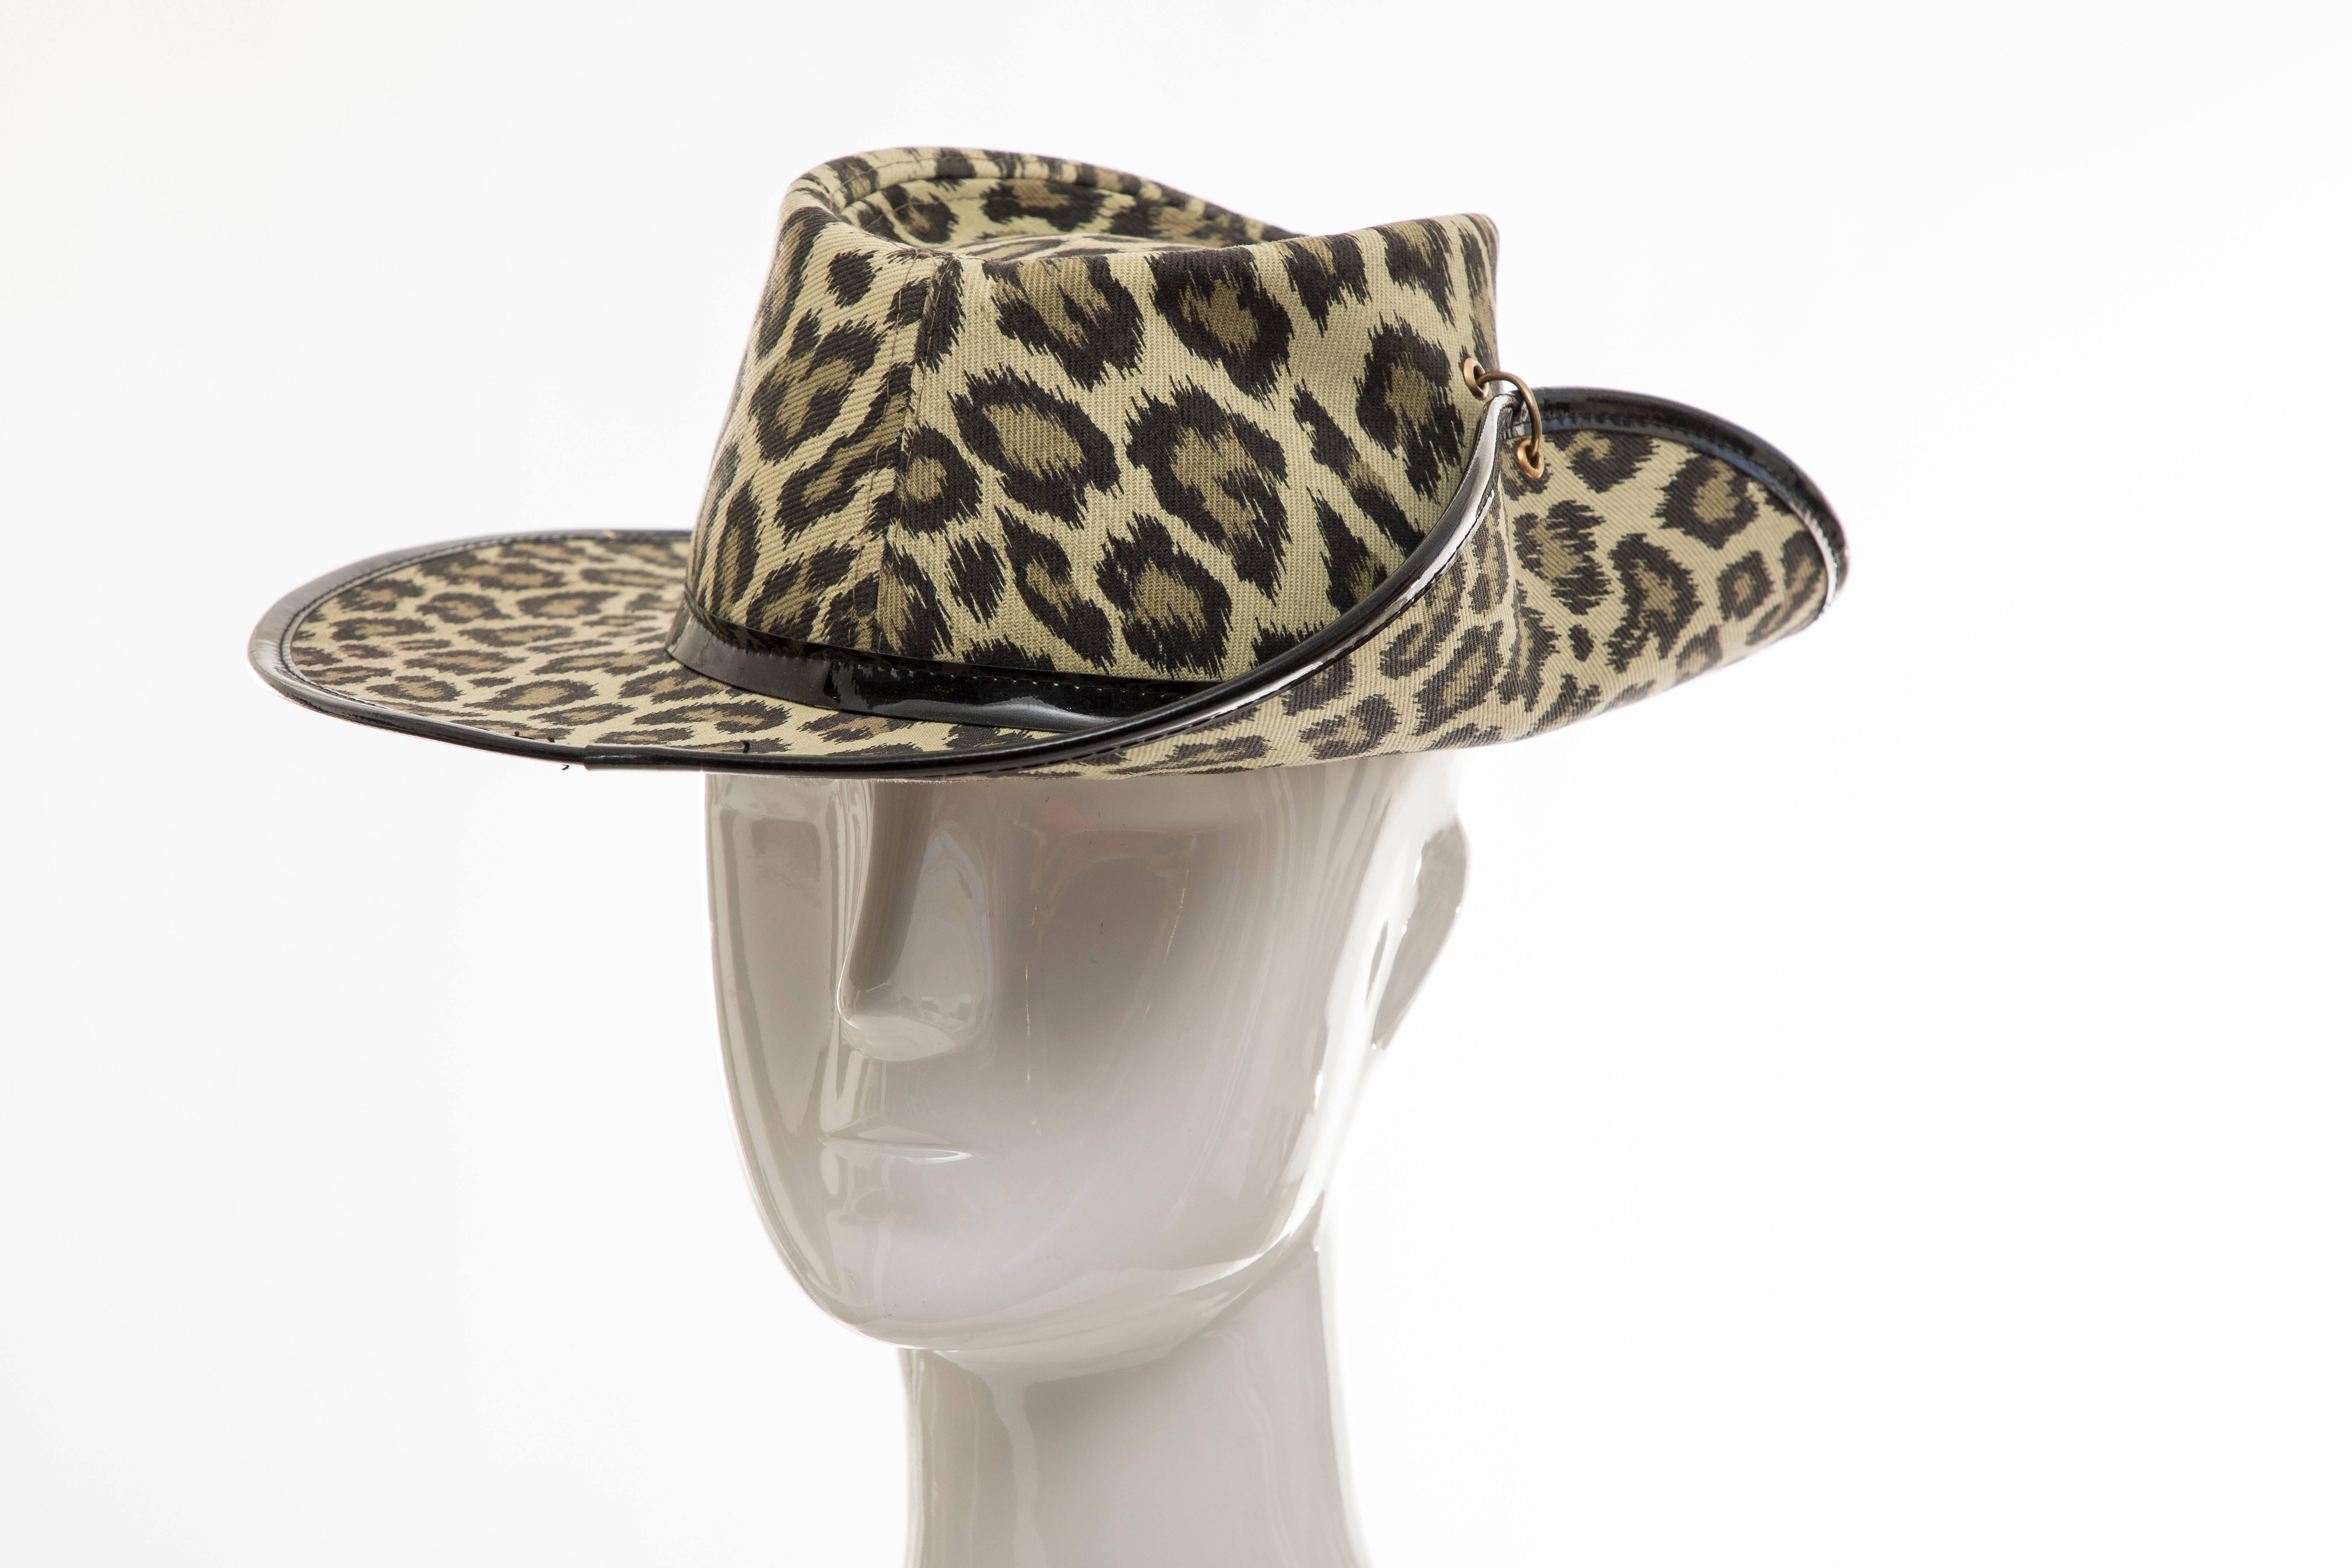 Junior Gaultier, Circa 1989 cotton leopard print hat with patent leather trim.

Circumference: 23